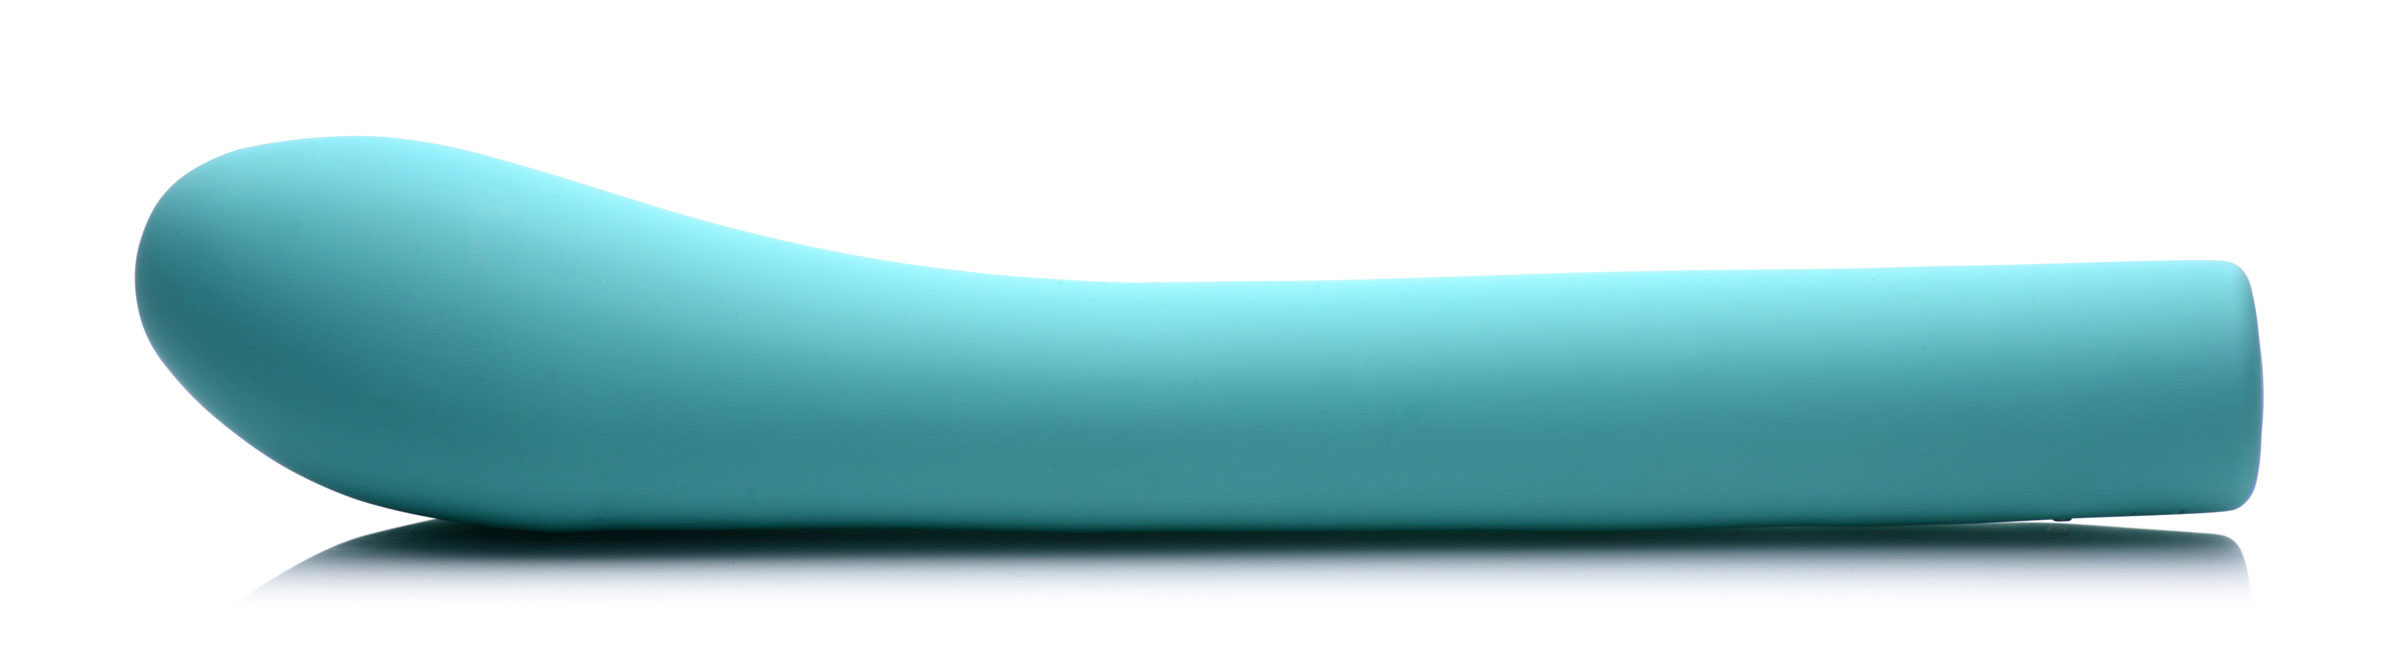 Inm Ag683teal 5 Star 9x Come Hither G Spot Silicone Vibrator Teal